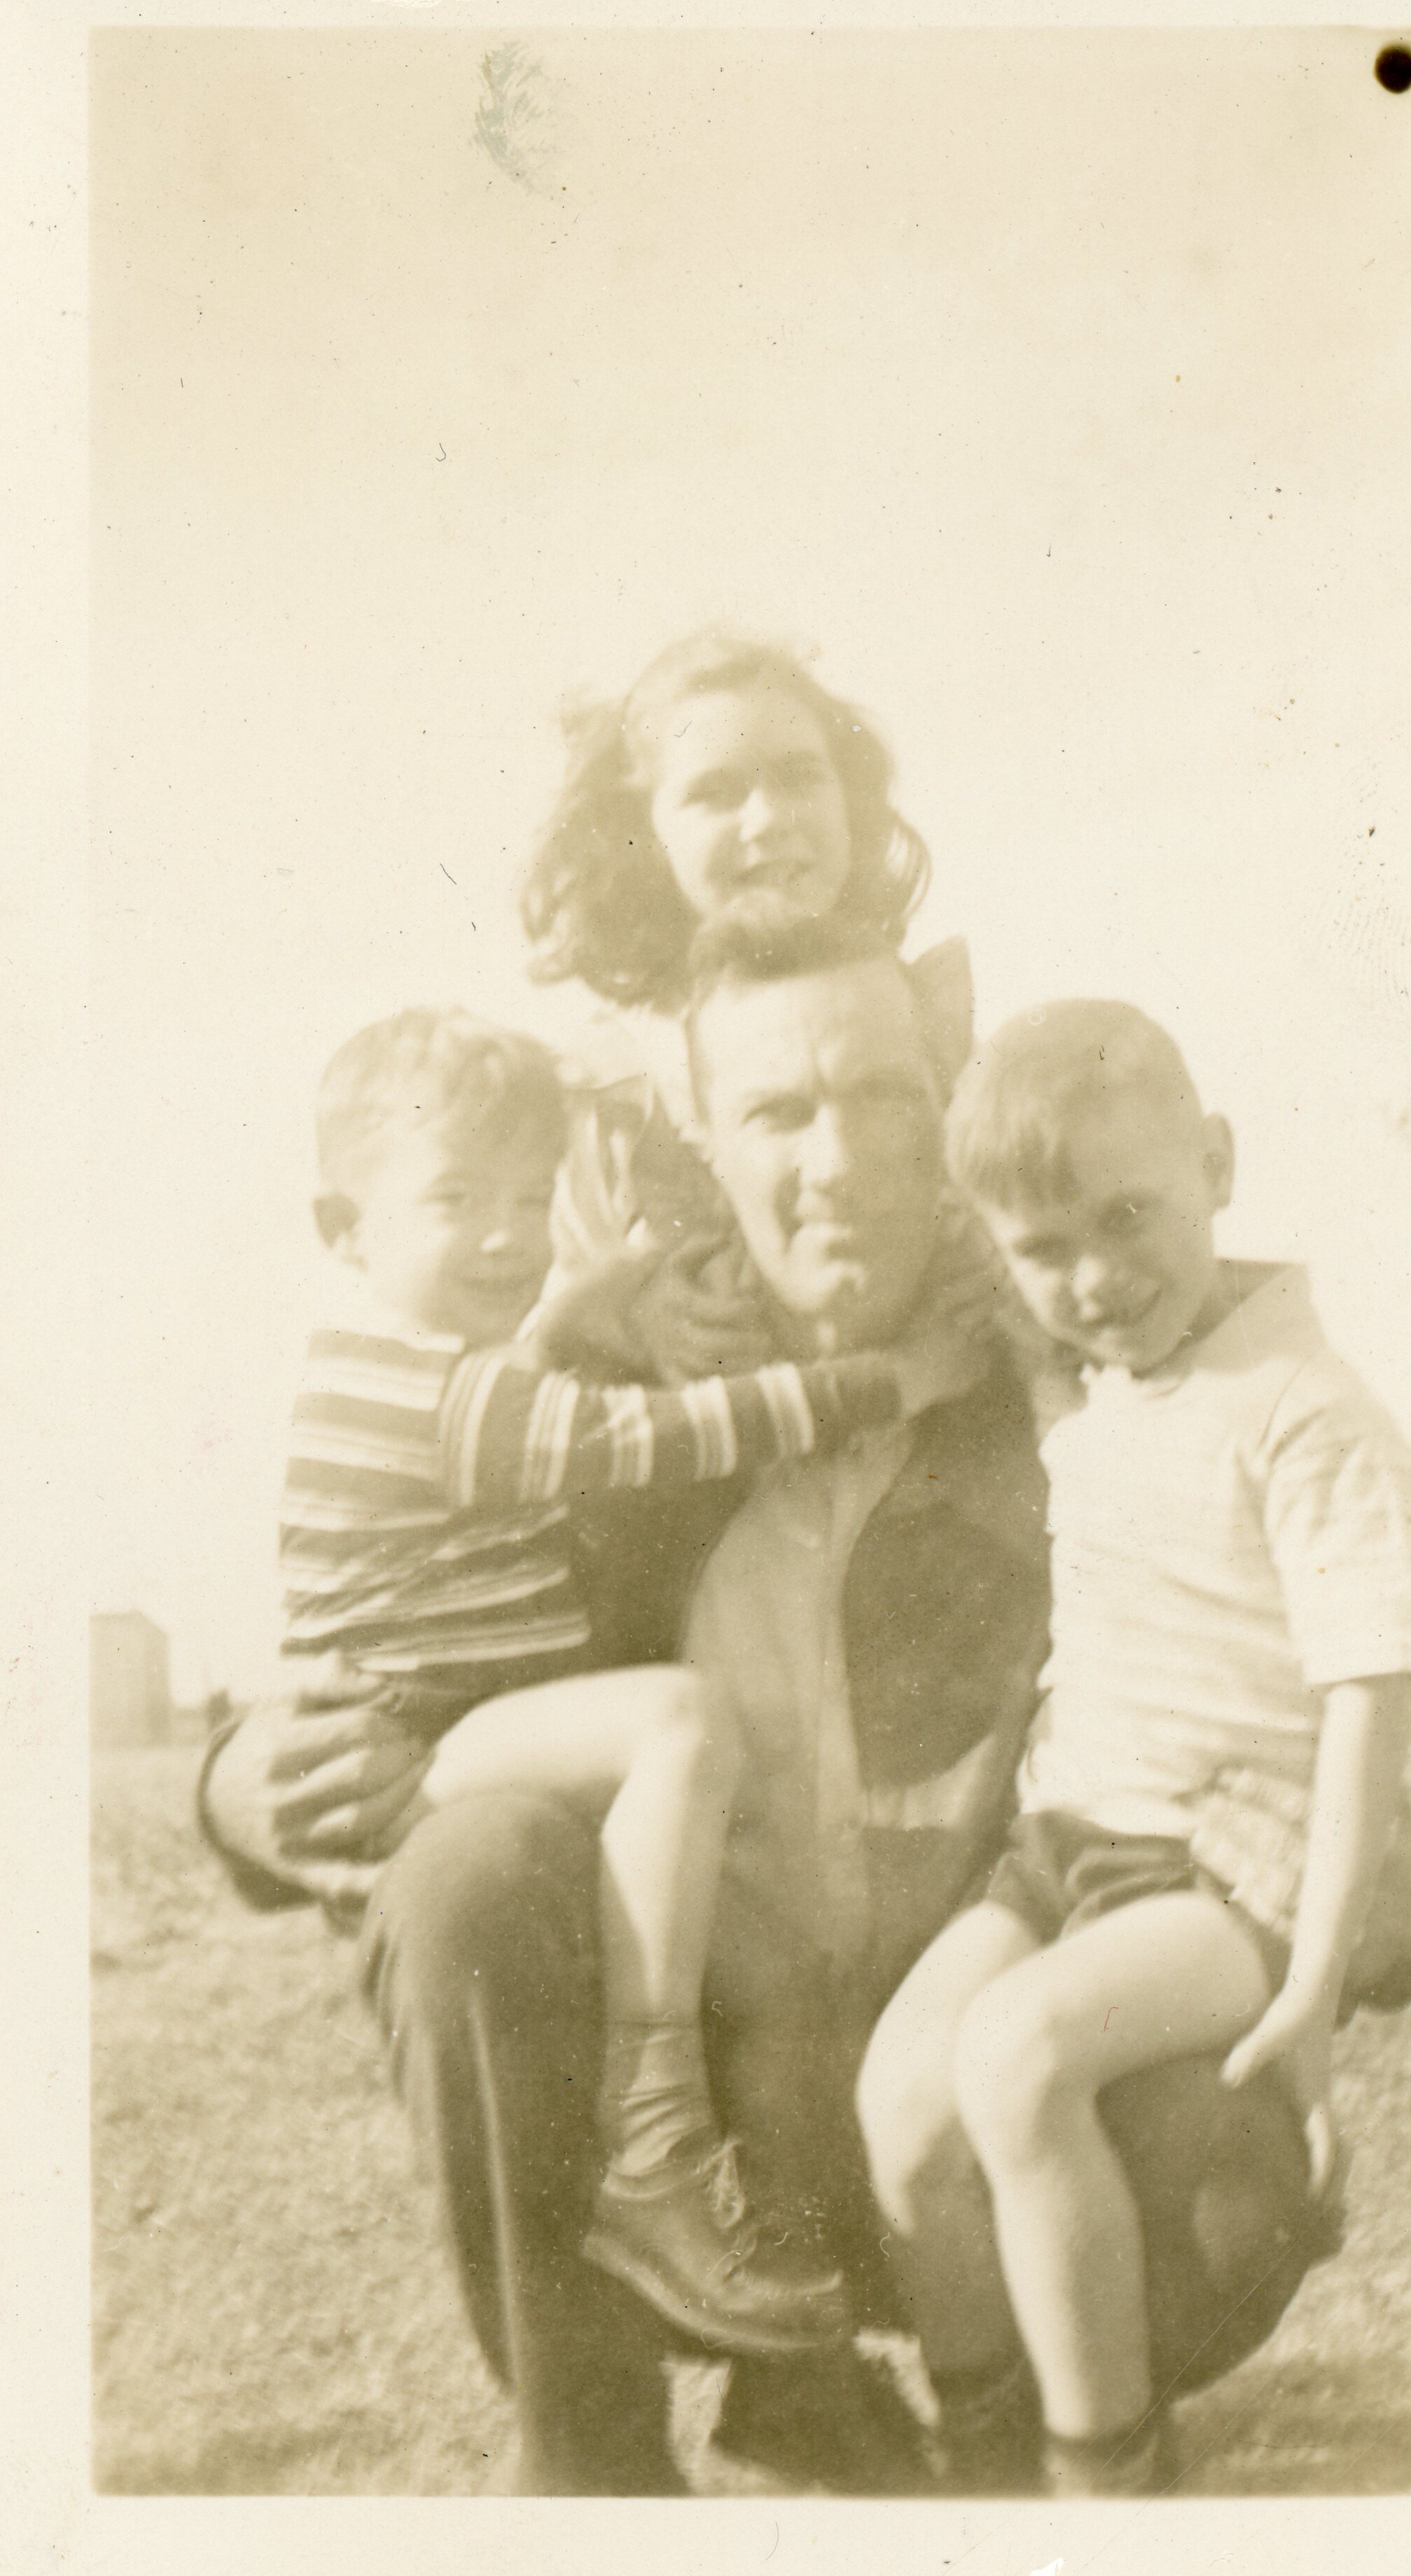 Paul Chadwick with niece and nephews Gertrude (behind Paul), Vernon (left) and “Brother” on right